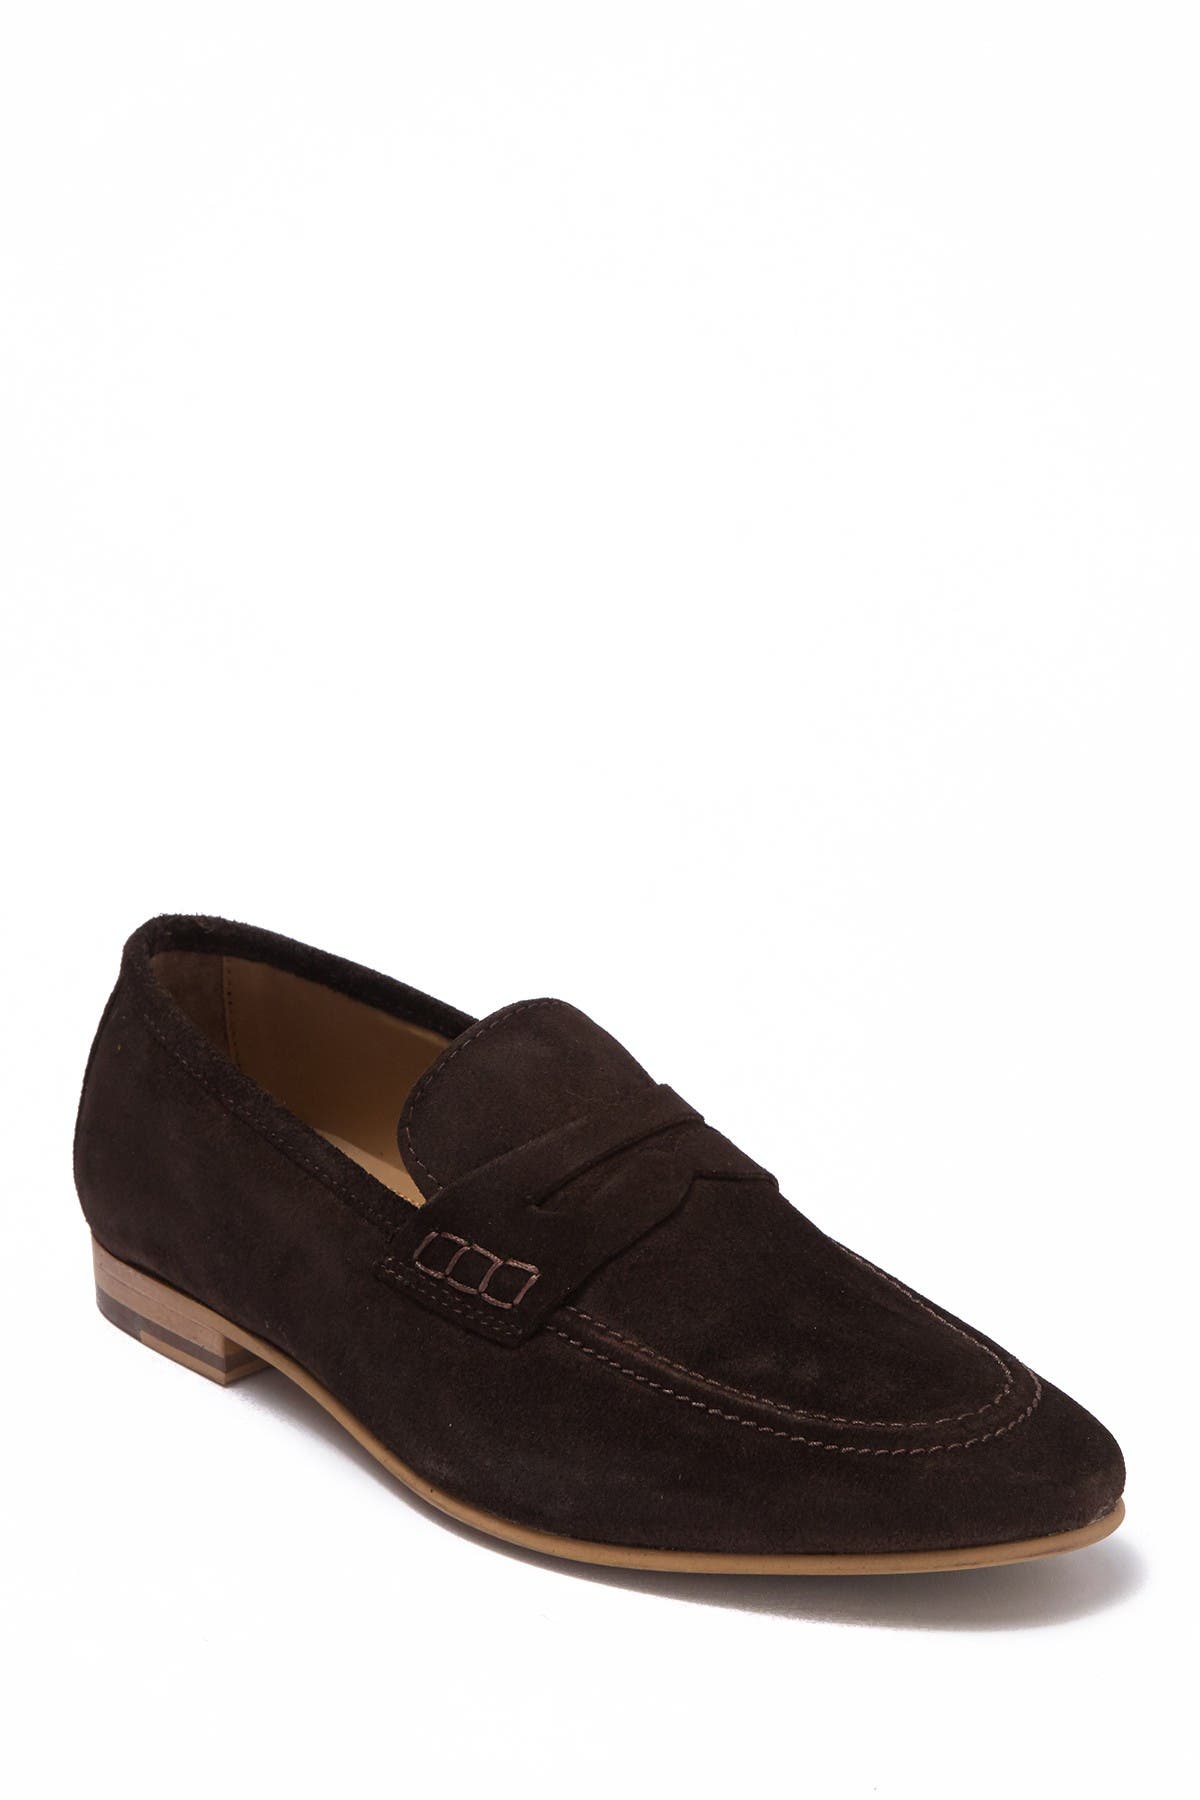 topman suede loafers